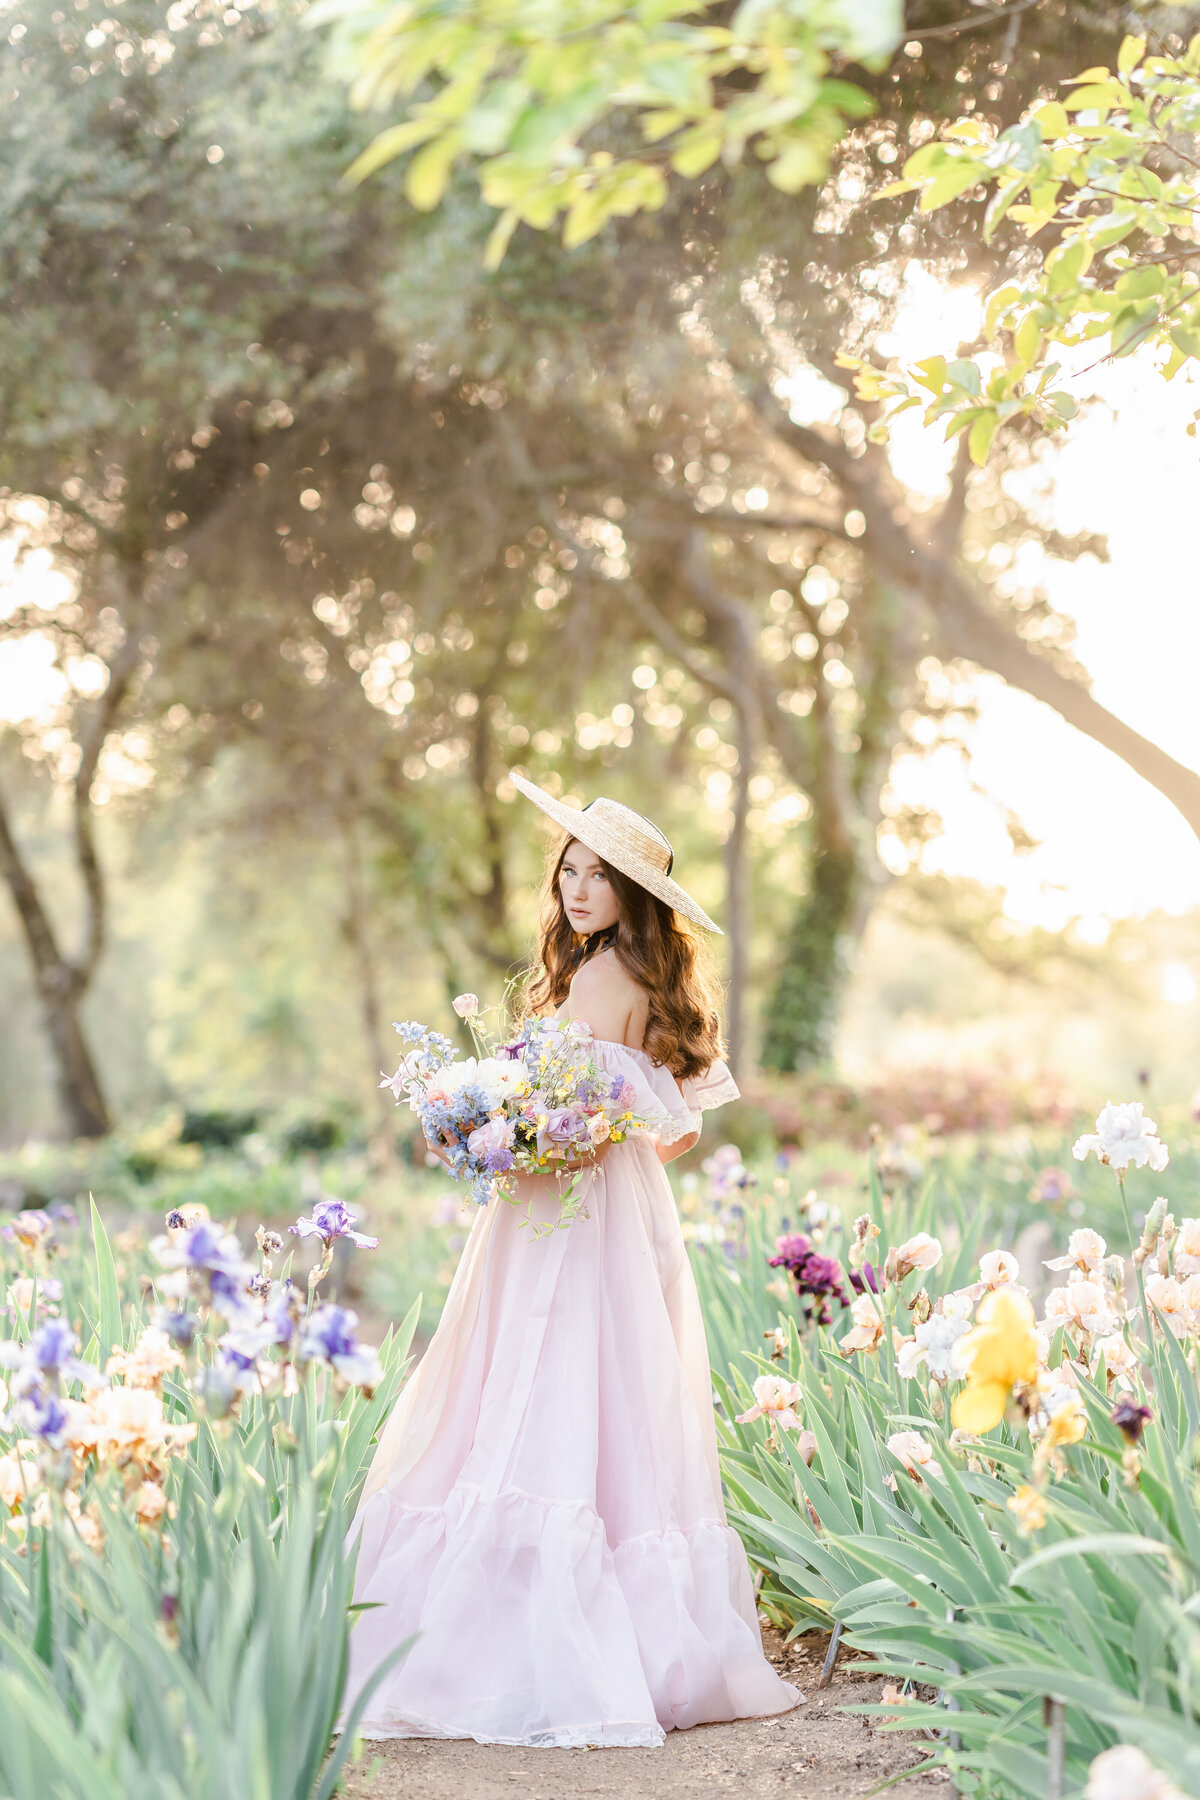 A woman wearing a lavender gown holding a bouquet of irises and standing in an iris garden photographed by Bay area photographer, Light Livin Photography.